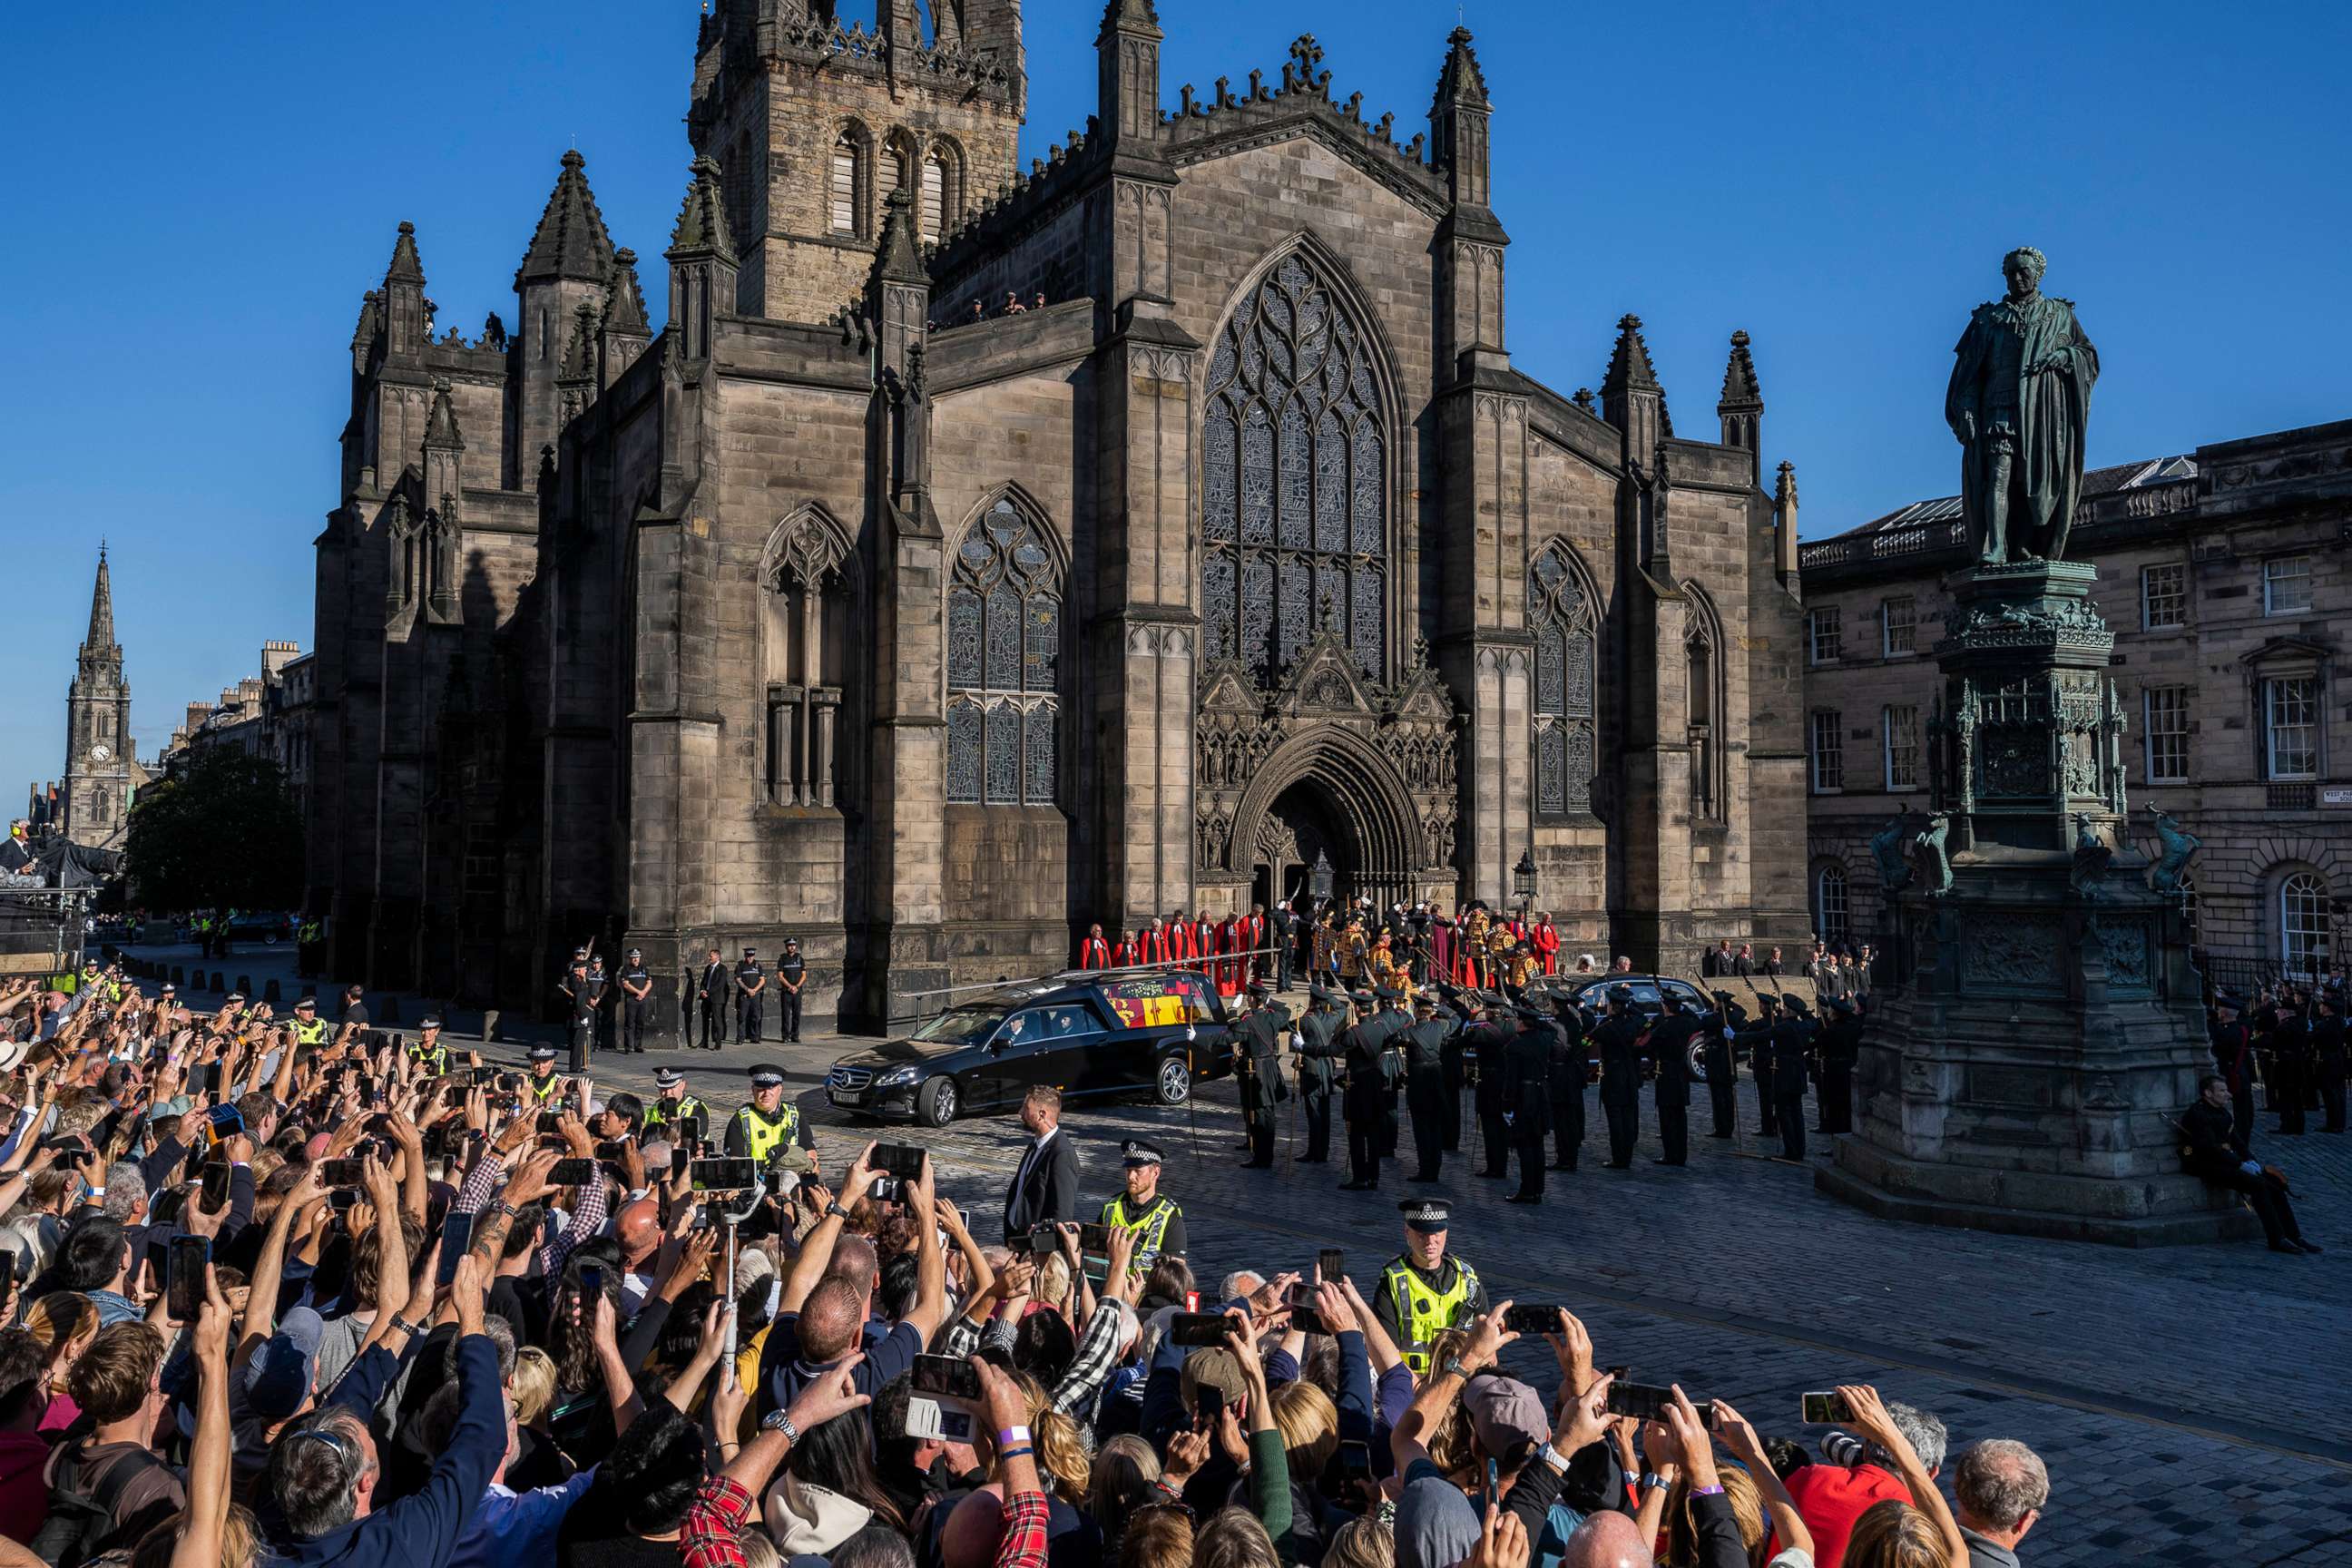 PHOTO: People take photos with their mobile phones as the Queens cortege with the hearse carrying Queen Elizabeth's coffin departs from St Giles Cathedral en route to Edinburgh Airport in Edinburgh, Scotland, Sept. 13, 2022.